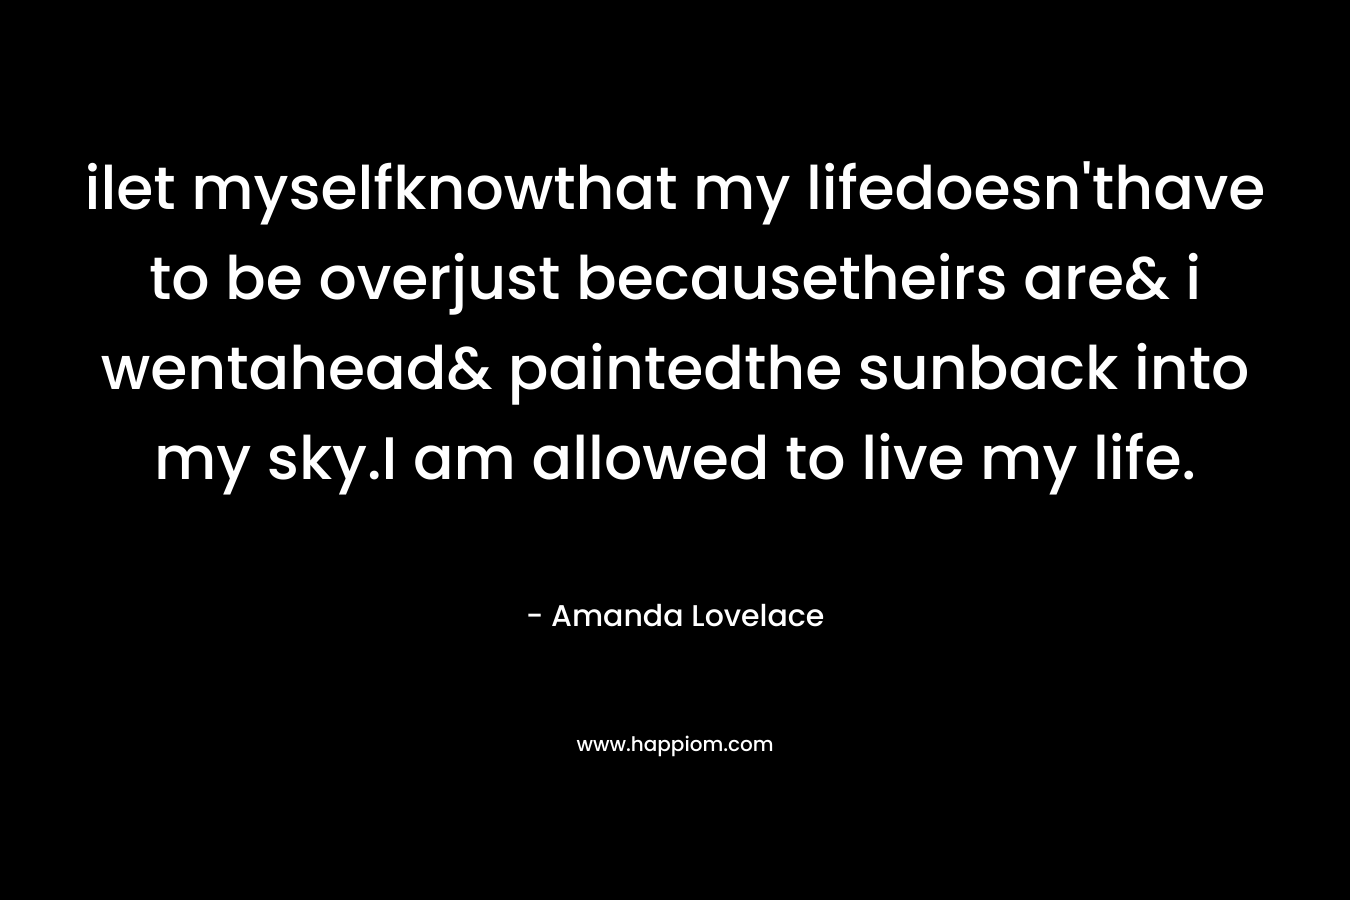 ilet myselfknowthat my lifedoesn’thave to be overjust becausetheirs are& i wentahead& paintedthe sunback into my sky.I am allowed to live my life. – Amanda Lovelace